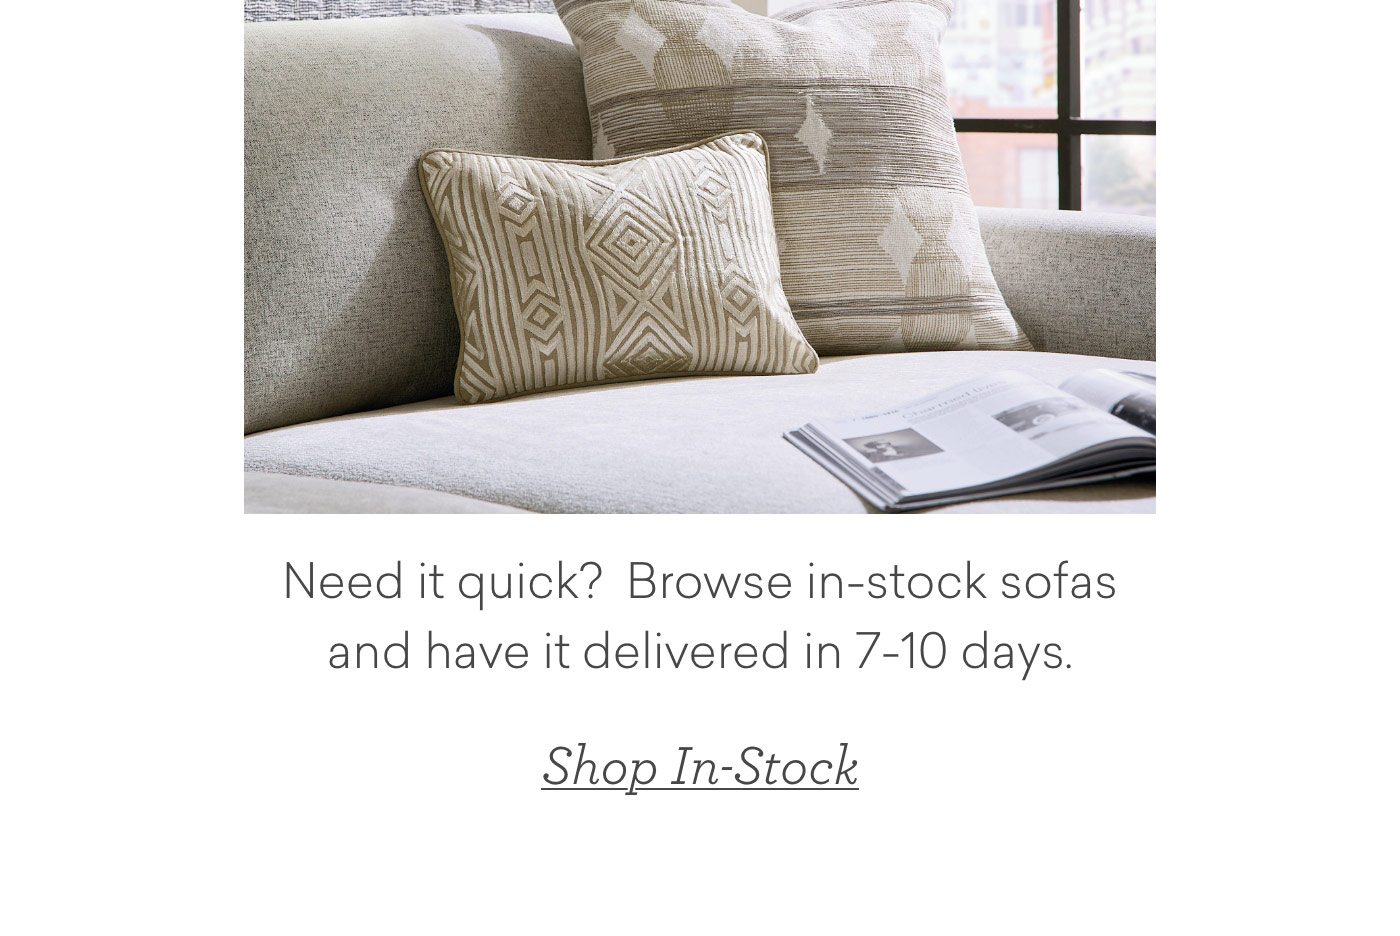 Need it quick? Browse in-stock sofas and have it delivered in 7-10 days. Shop In-Stock.